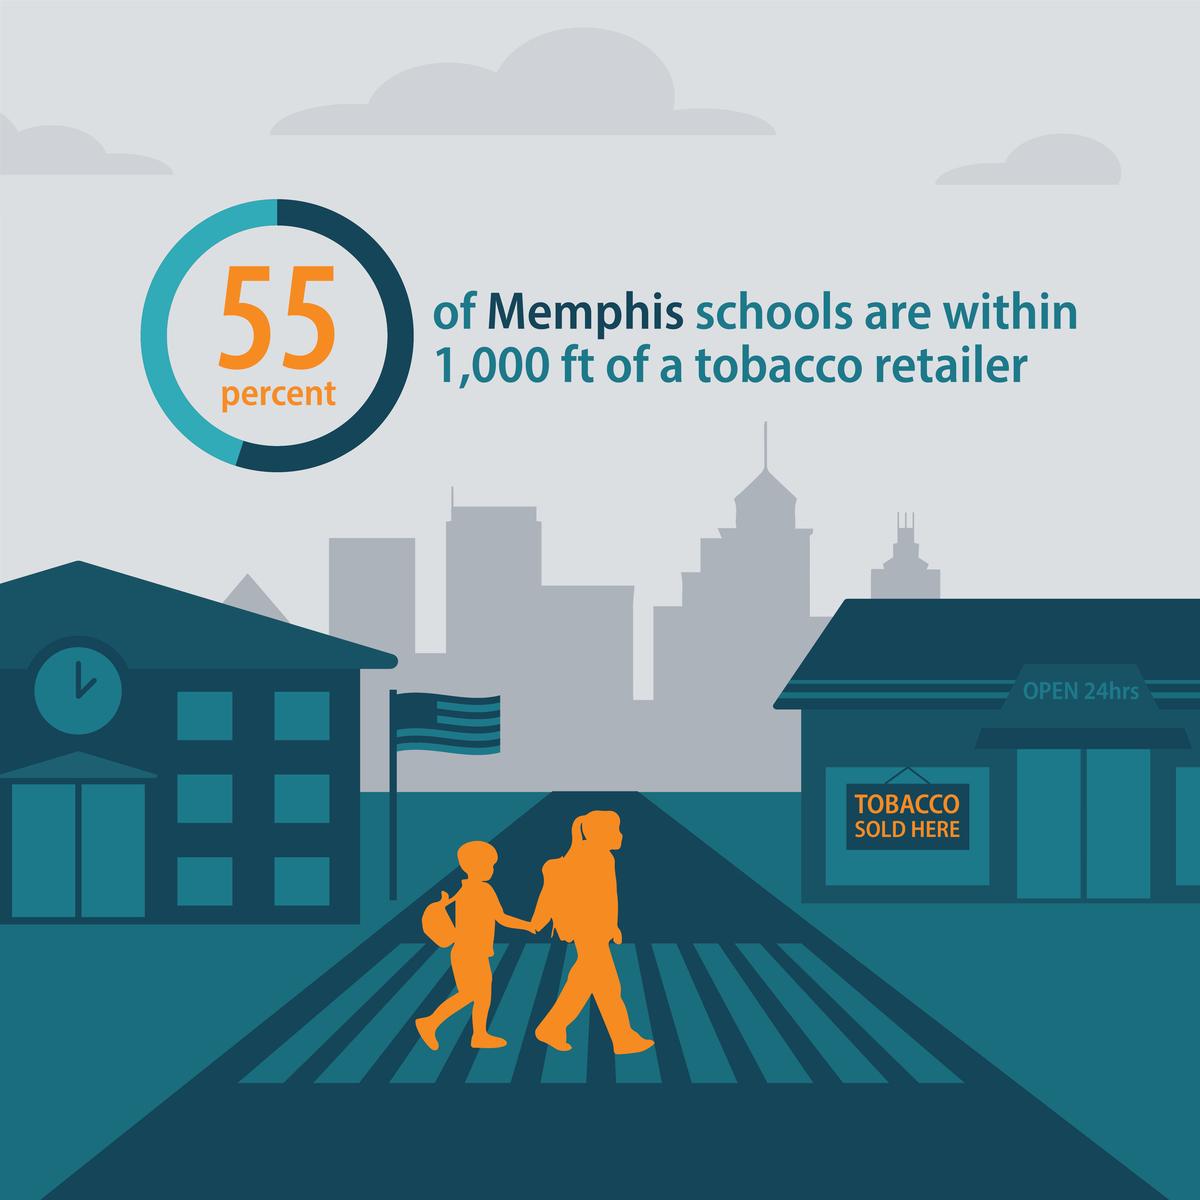 55 percent of Memphis schools are within 1,000 feet of a tobacco retailer